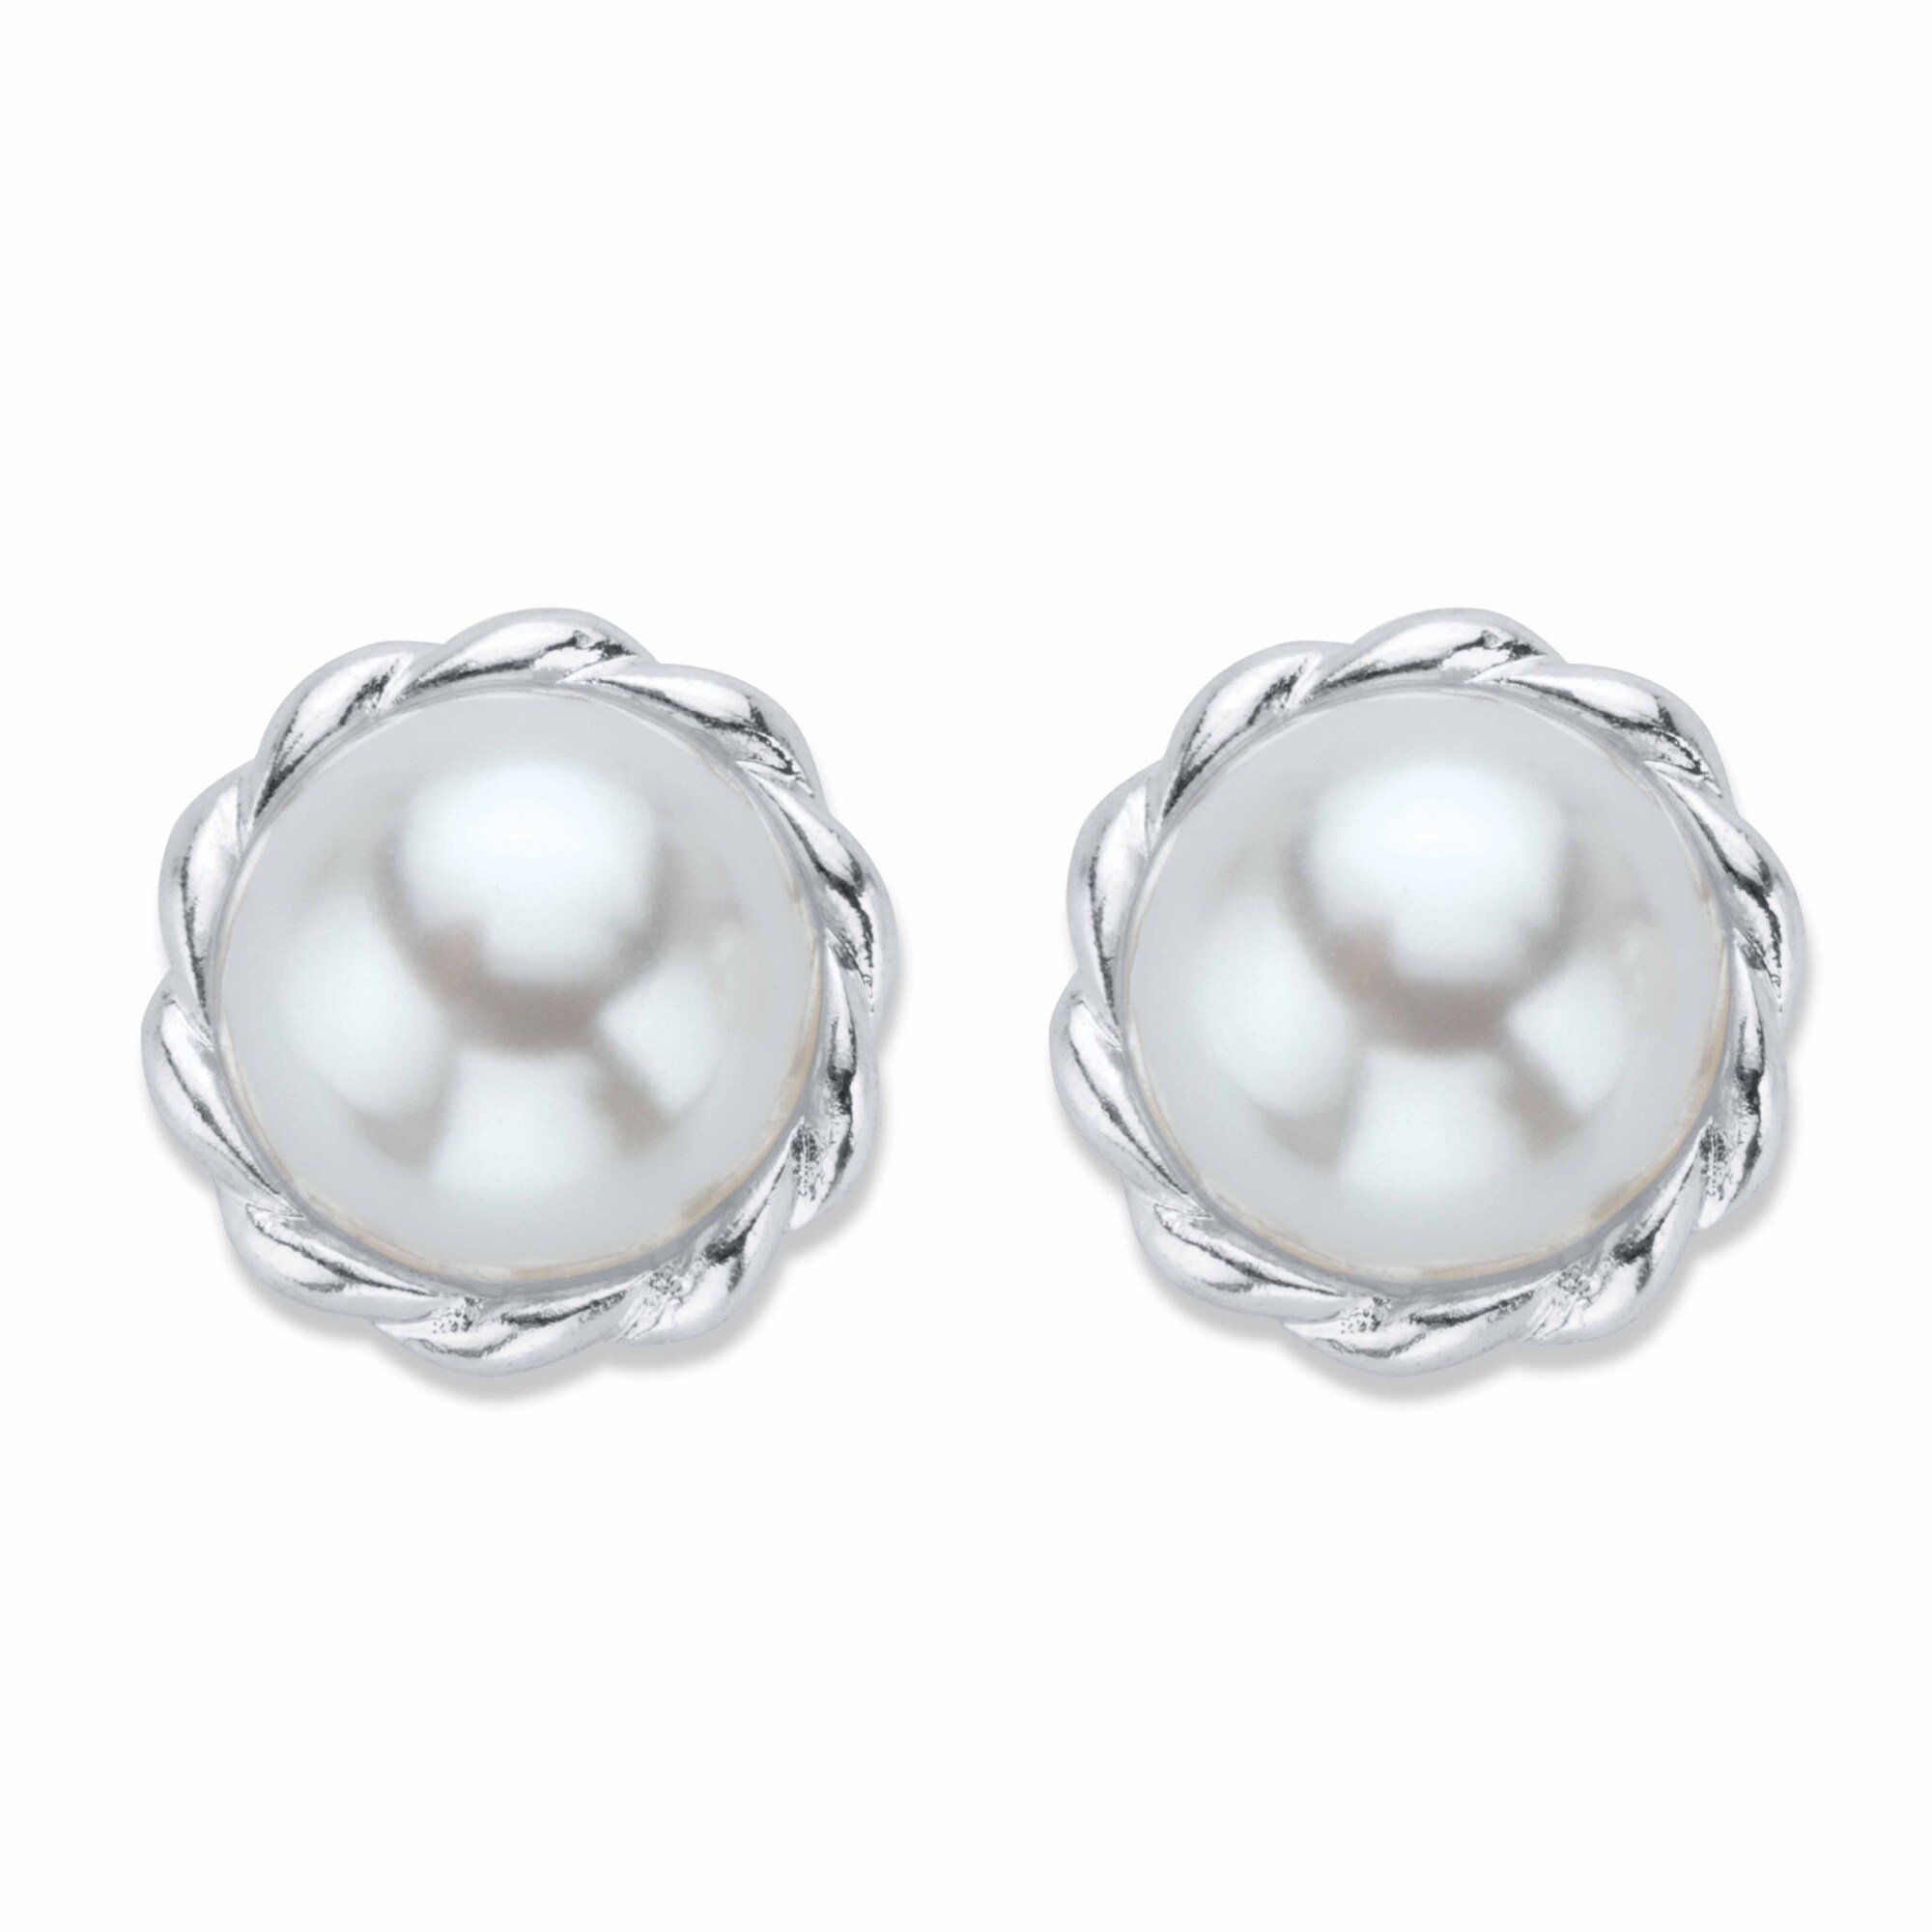 White 10mm Simulated Shell Pearl Earrings on Metal-Free Plastic Posts